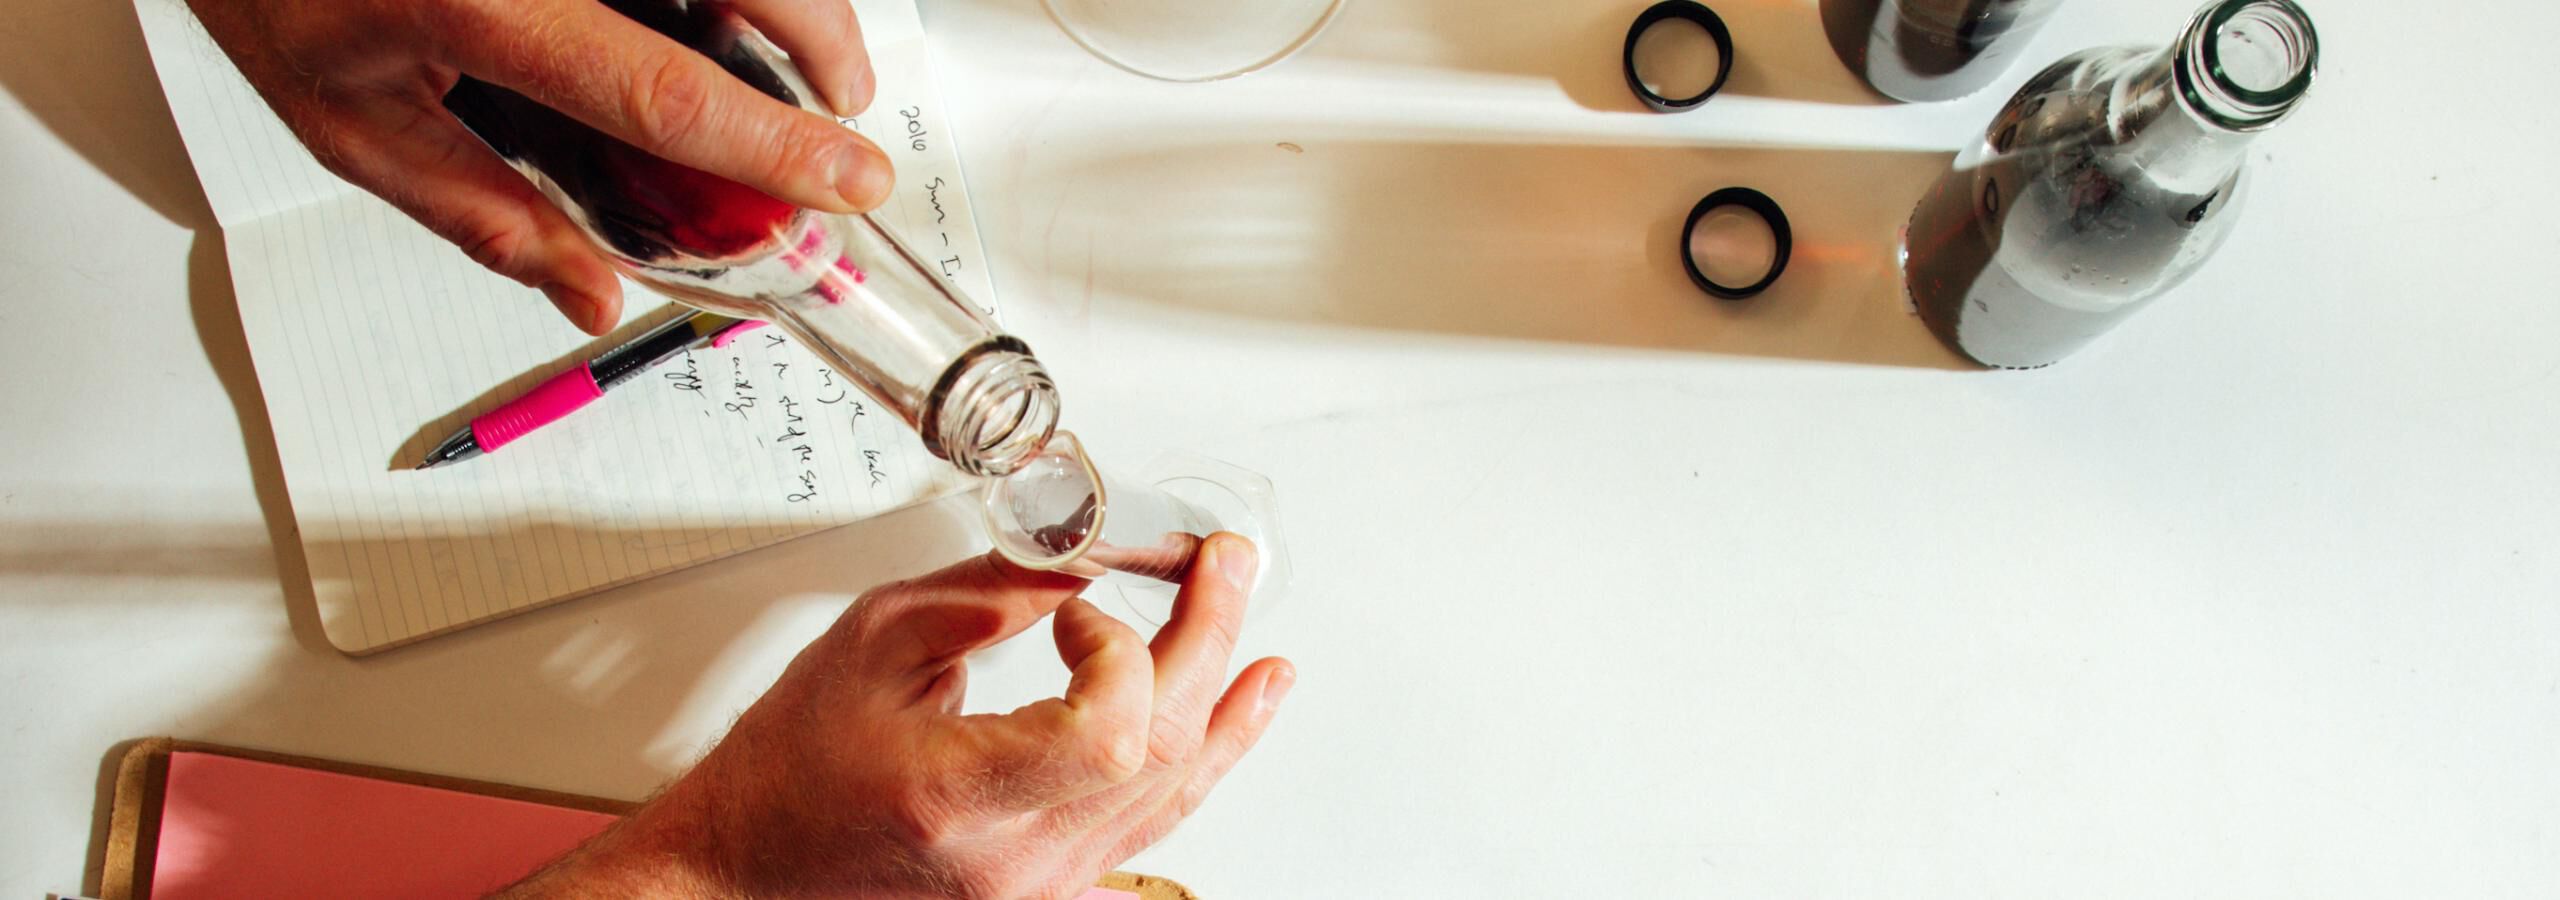 Overhead shot of a person blending wine in a lab